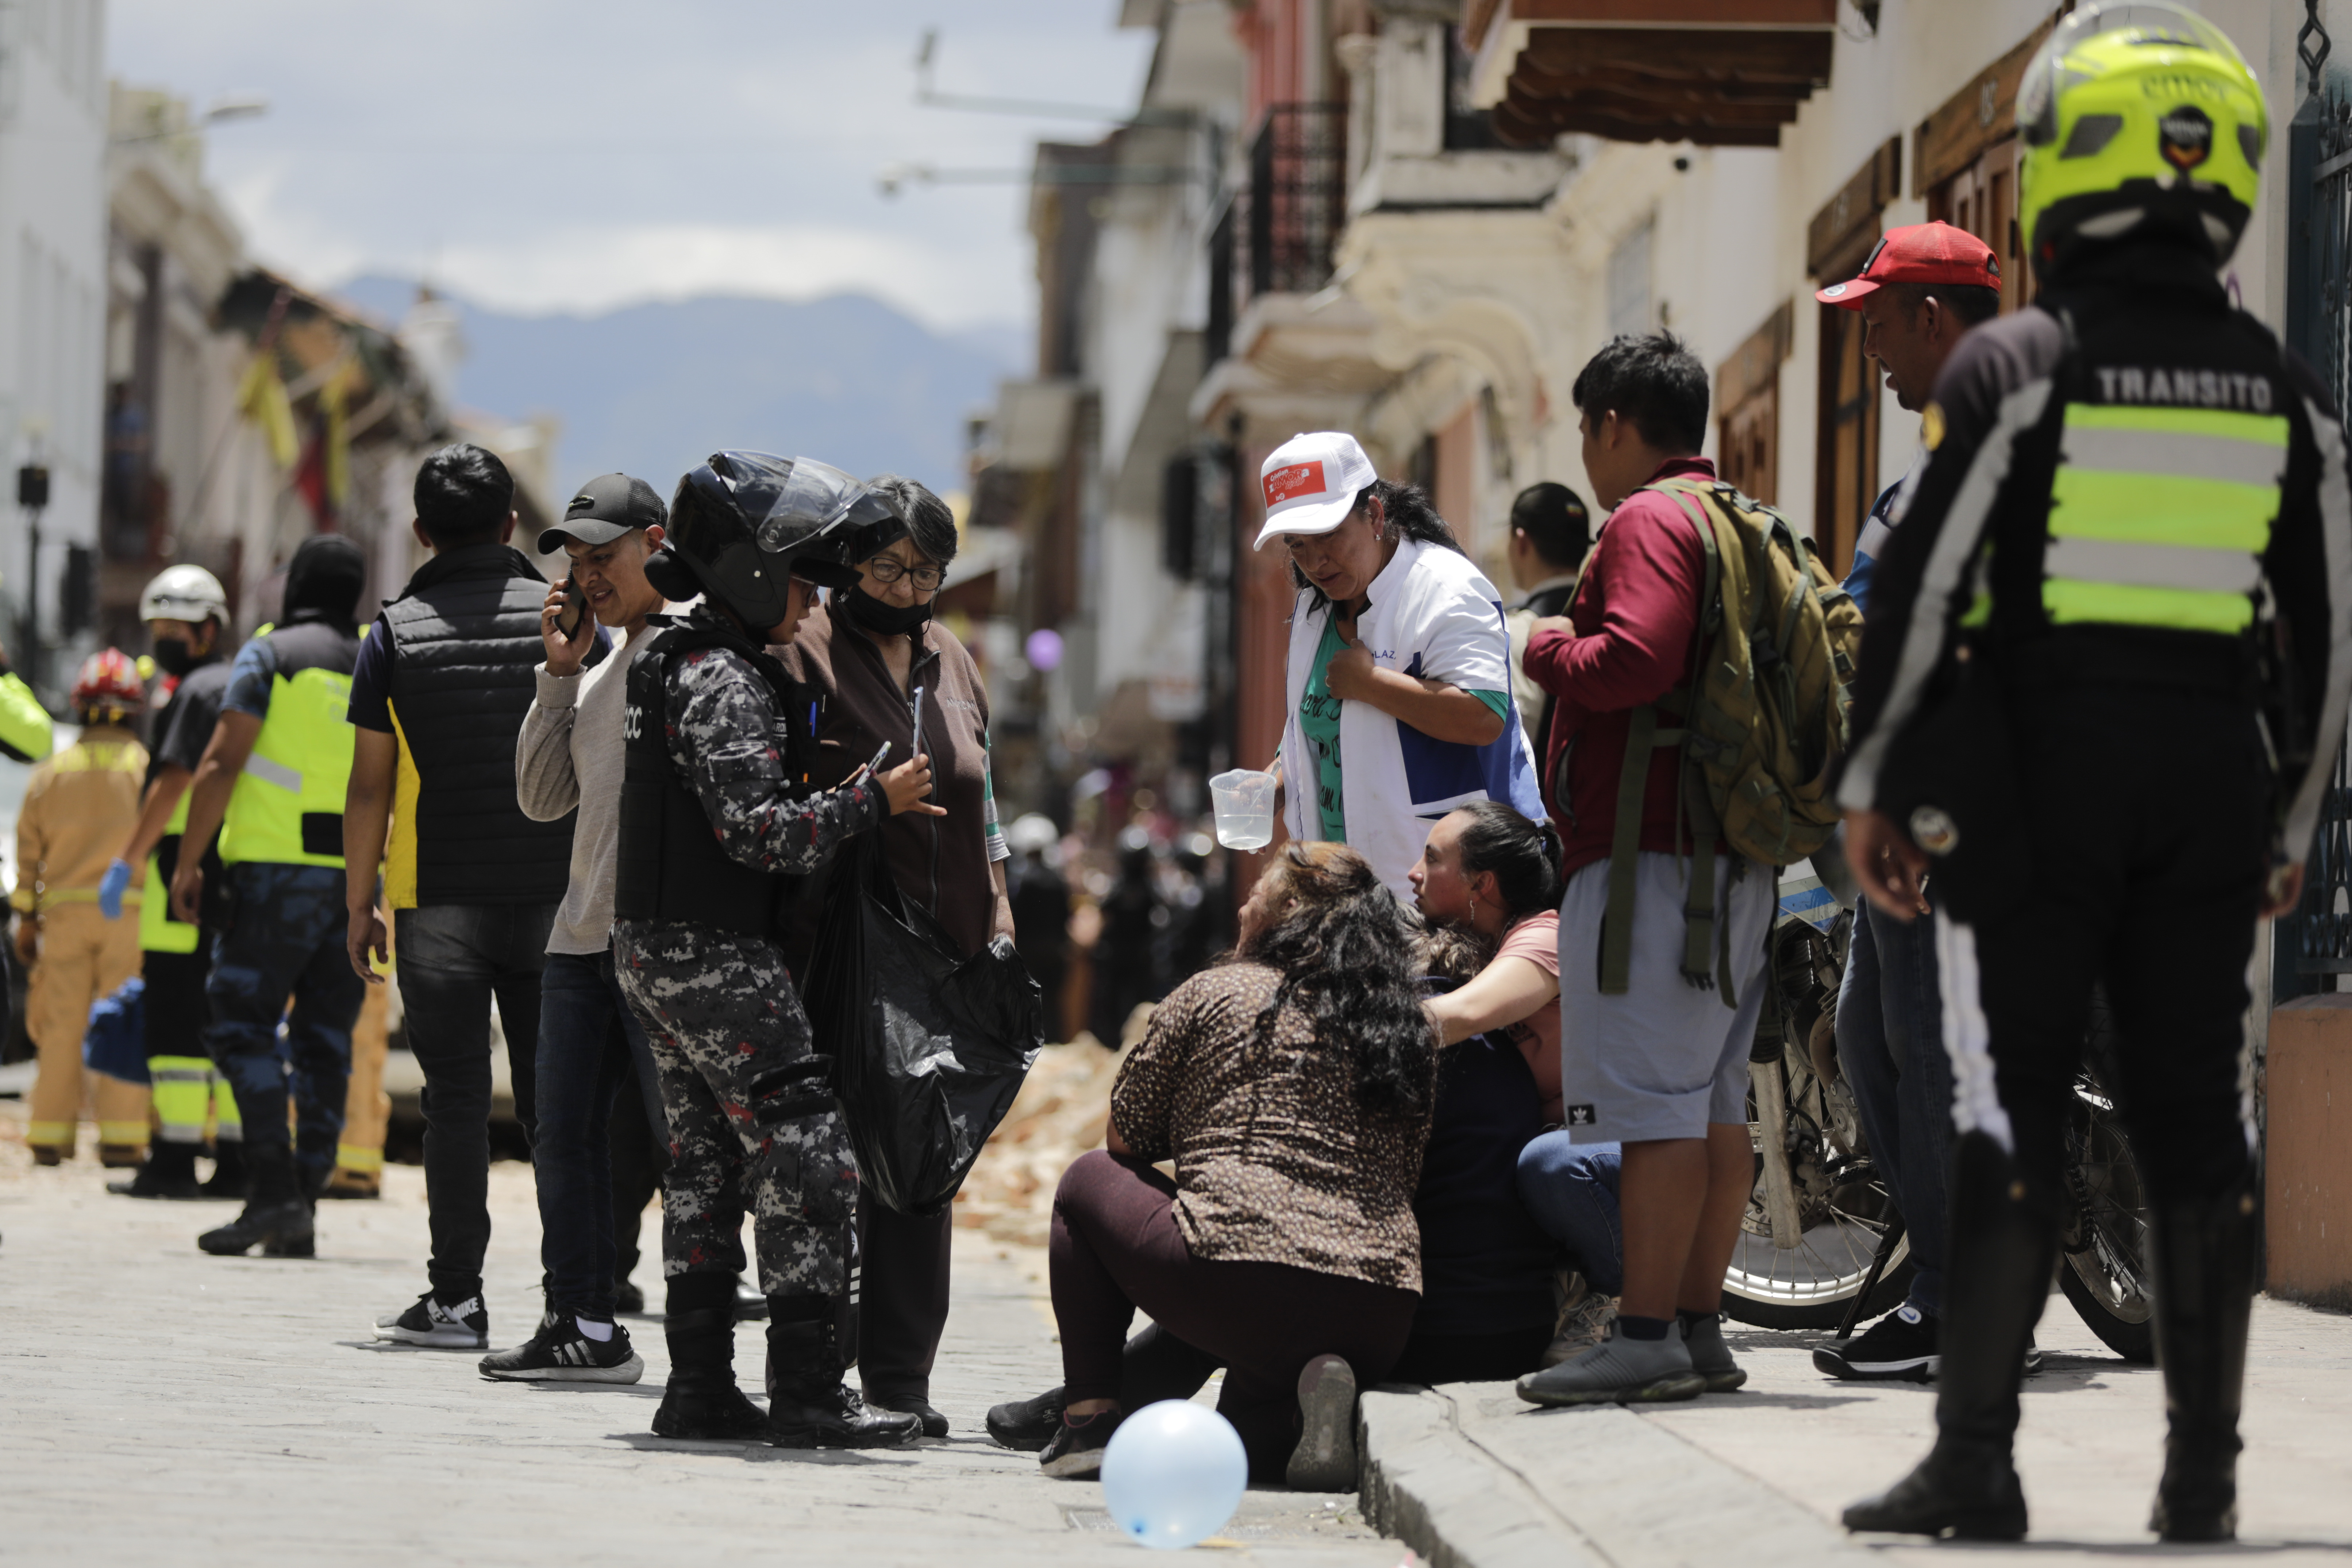 Police have spoken to people near the site where a car was crushed by rubble after a strong earthquake struck Cuenca, Ecuador on Saturday, March 18, 2023. Register 50 Milias Al Sur de Guayaquil in Guayaquil.  (Photo AP/Xavier Caivinagua)